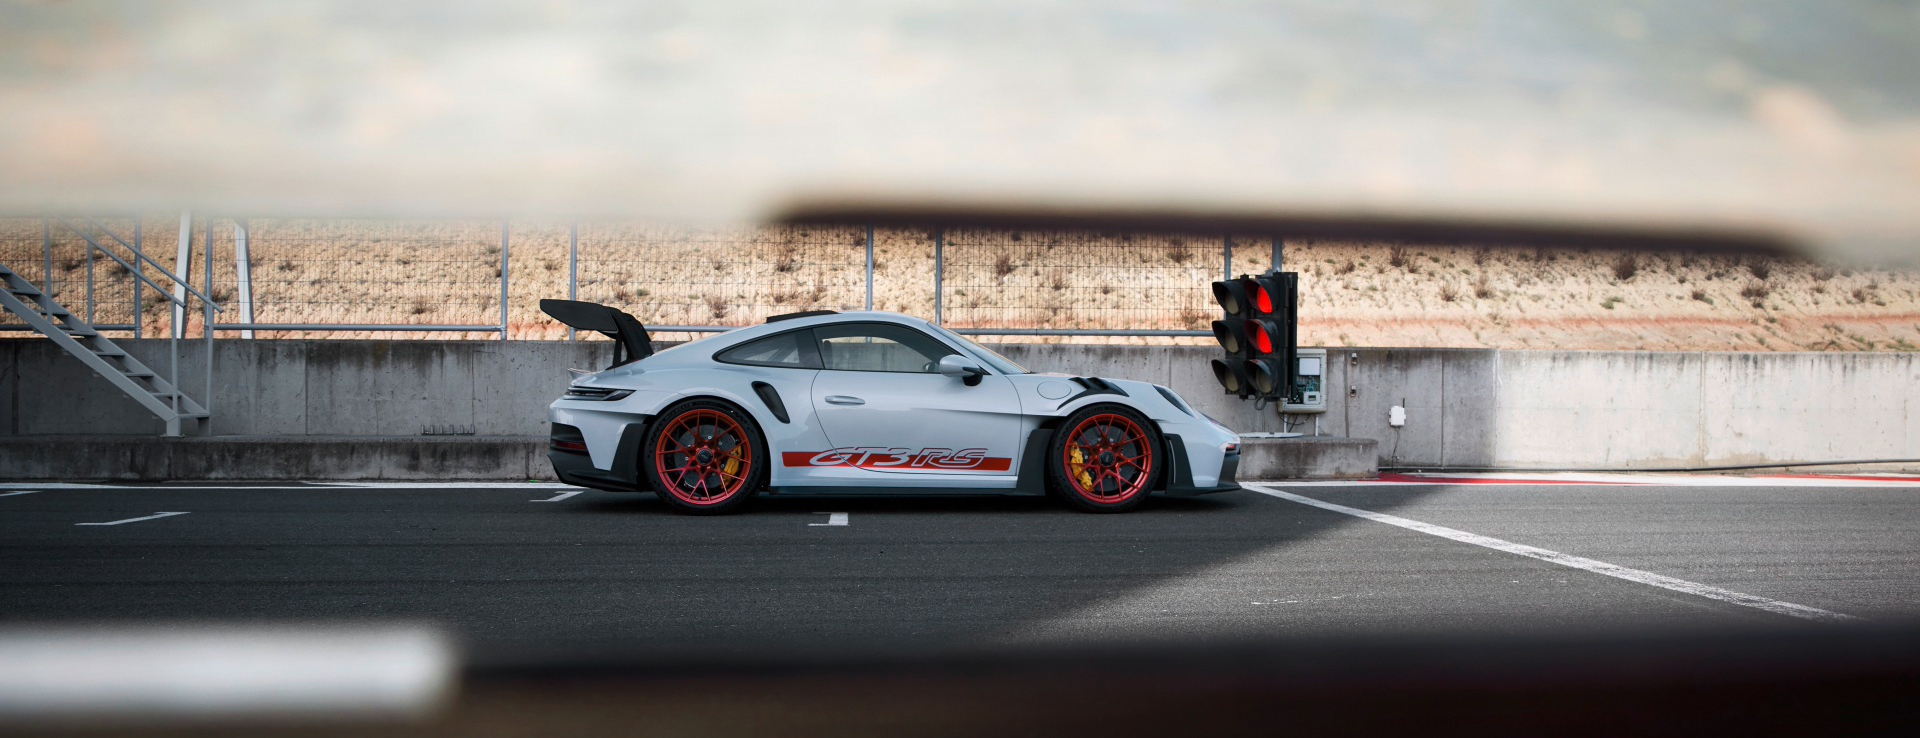 Side view of Porsche 911 GT3 RS on starting grid